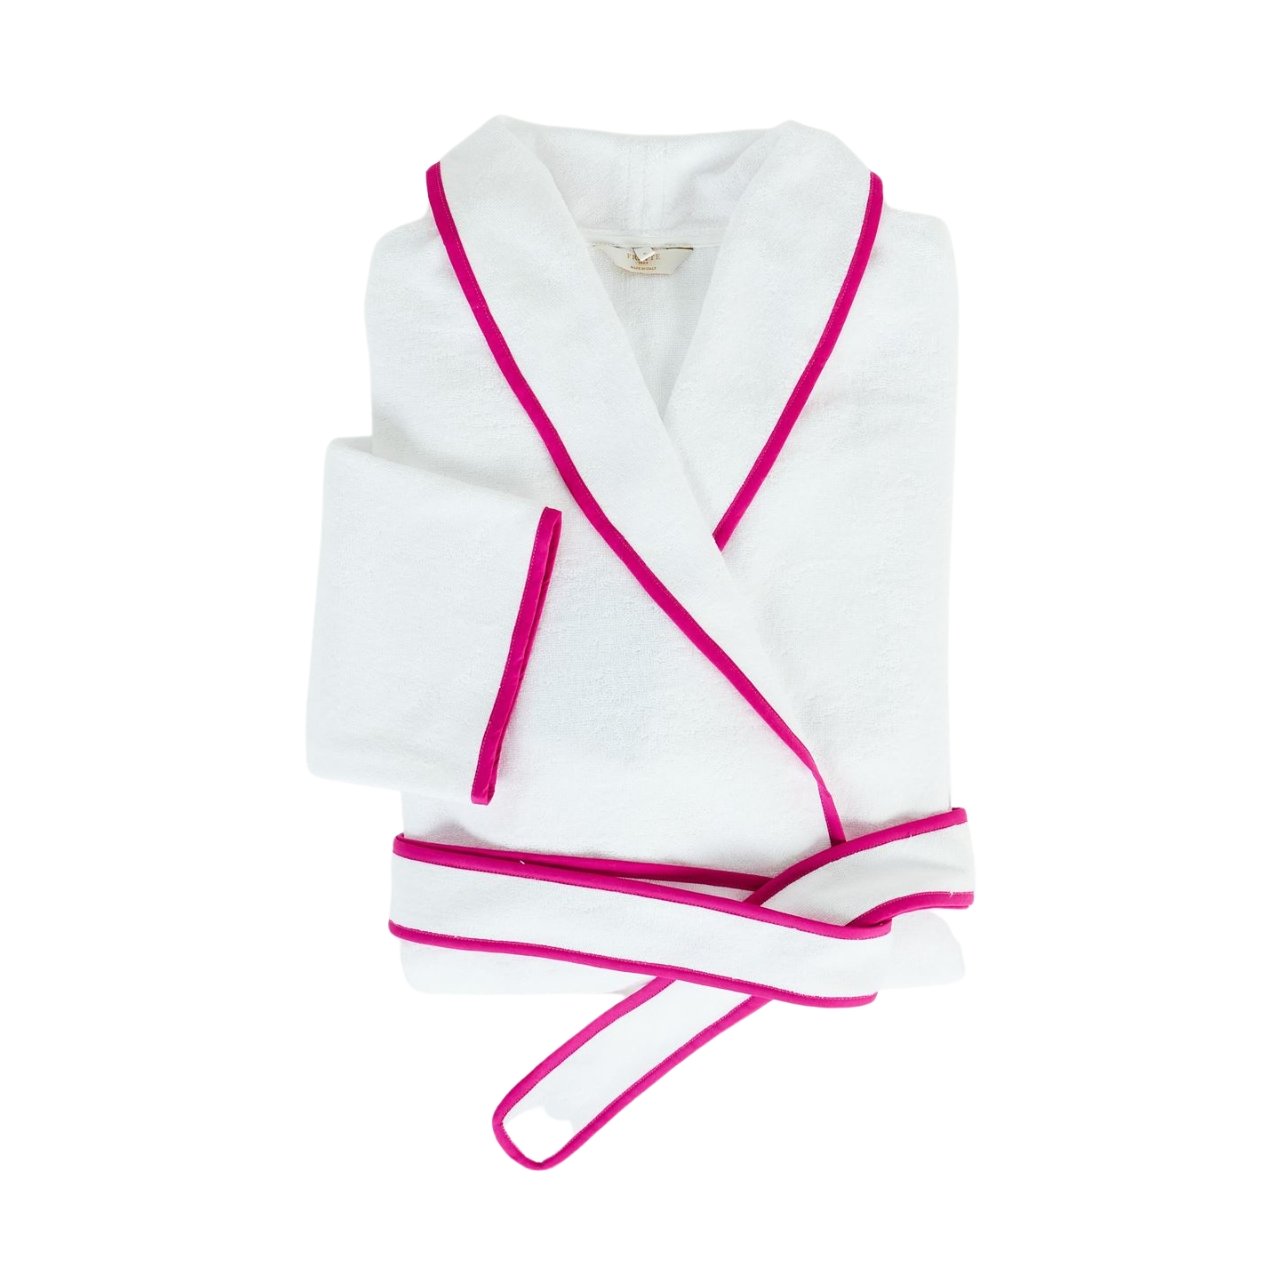 Portrait of white belted robe with pink trim